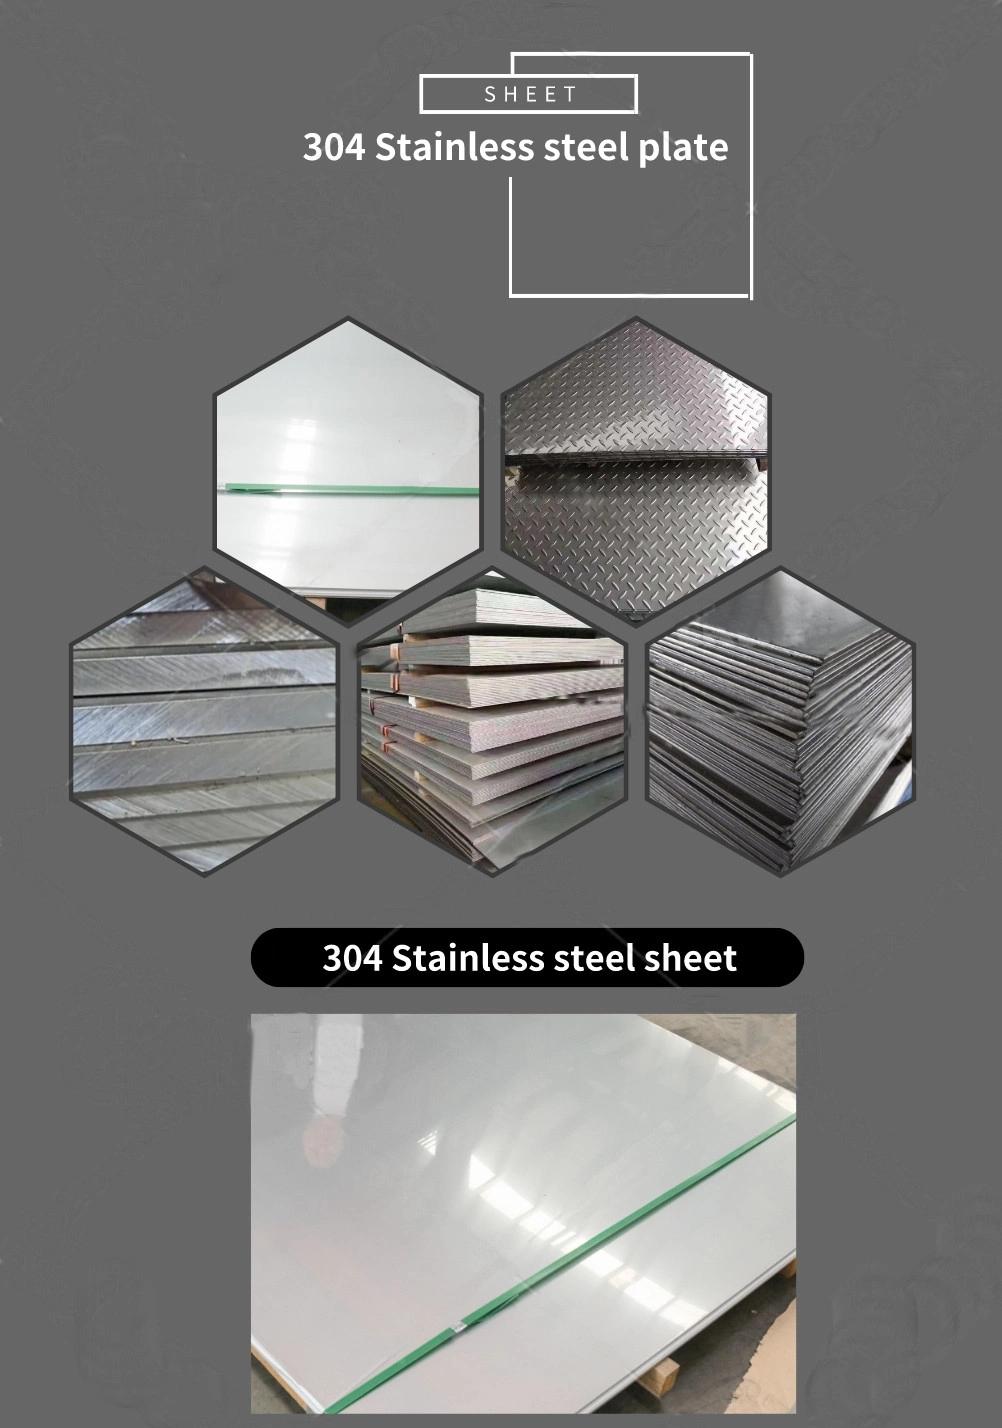 ASTM/GB/JIS 201 347 329 434 Hot Rolled Stainless Steel Plate for Boat Board